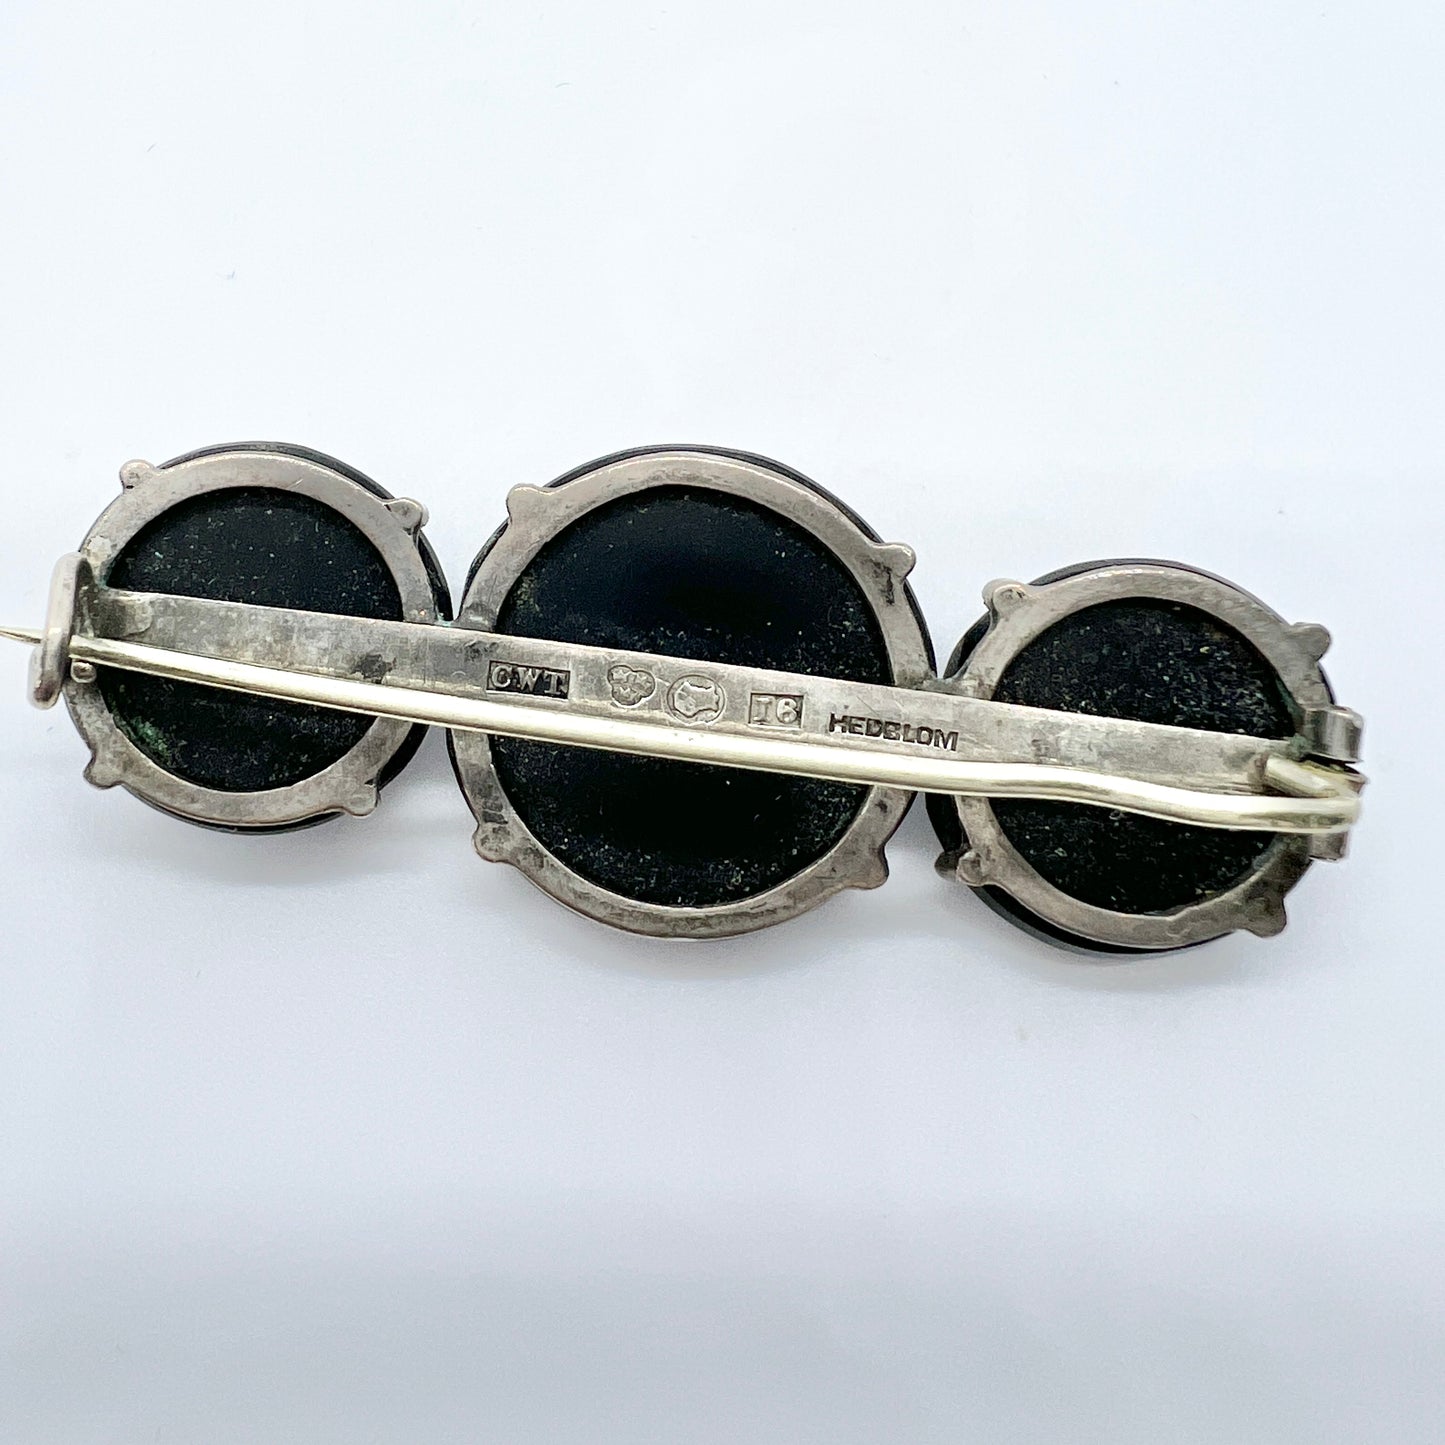 Hedblom Sweden 1887 Antique Victorian Solid Silver French Jet Mourning Brooch.